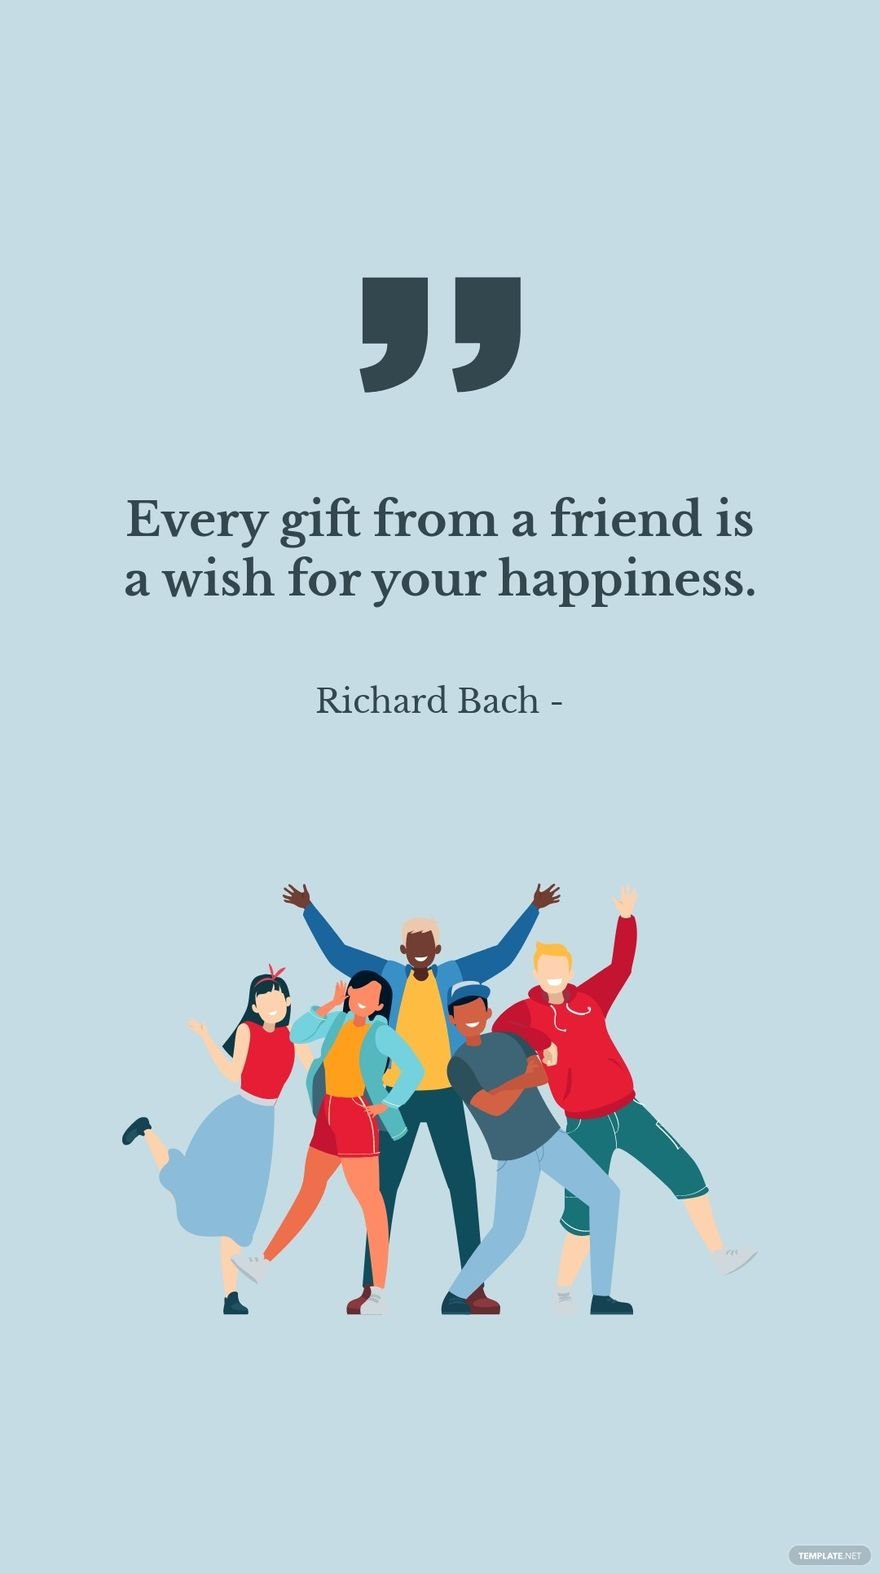 Free Richard Bach - Every gift from a friend is a wish for your happiness.